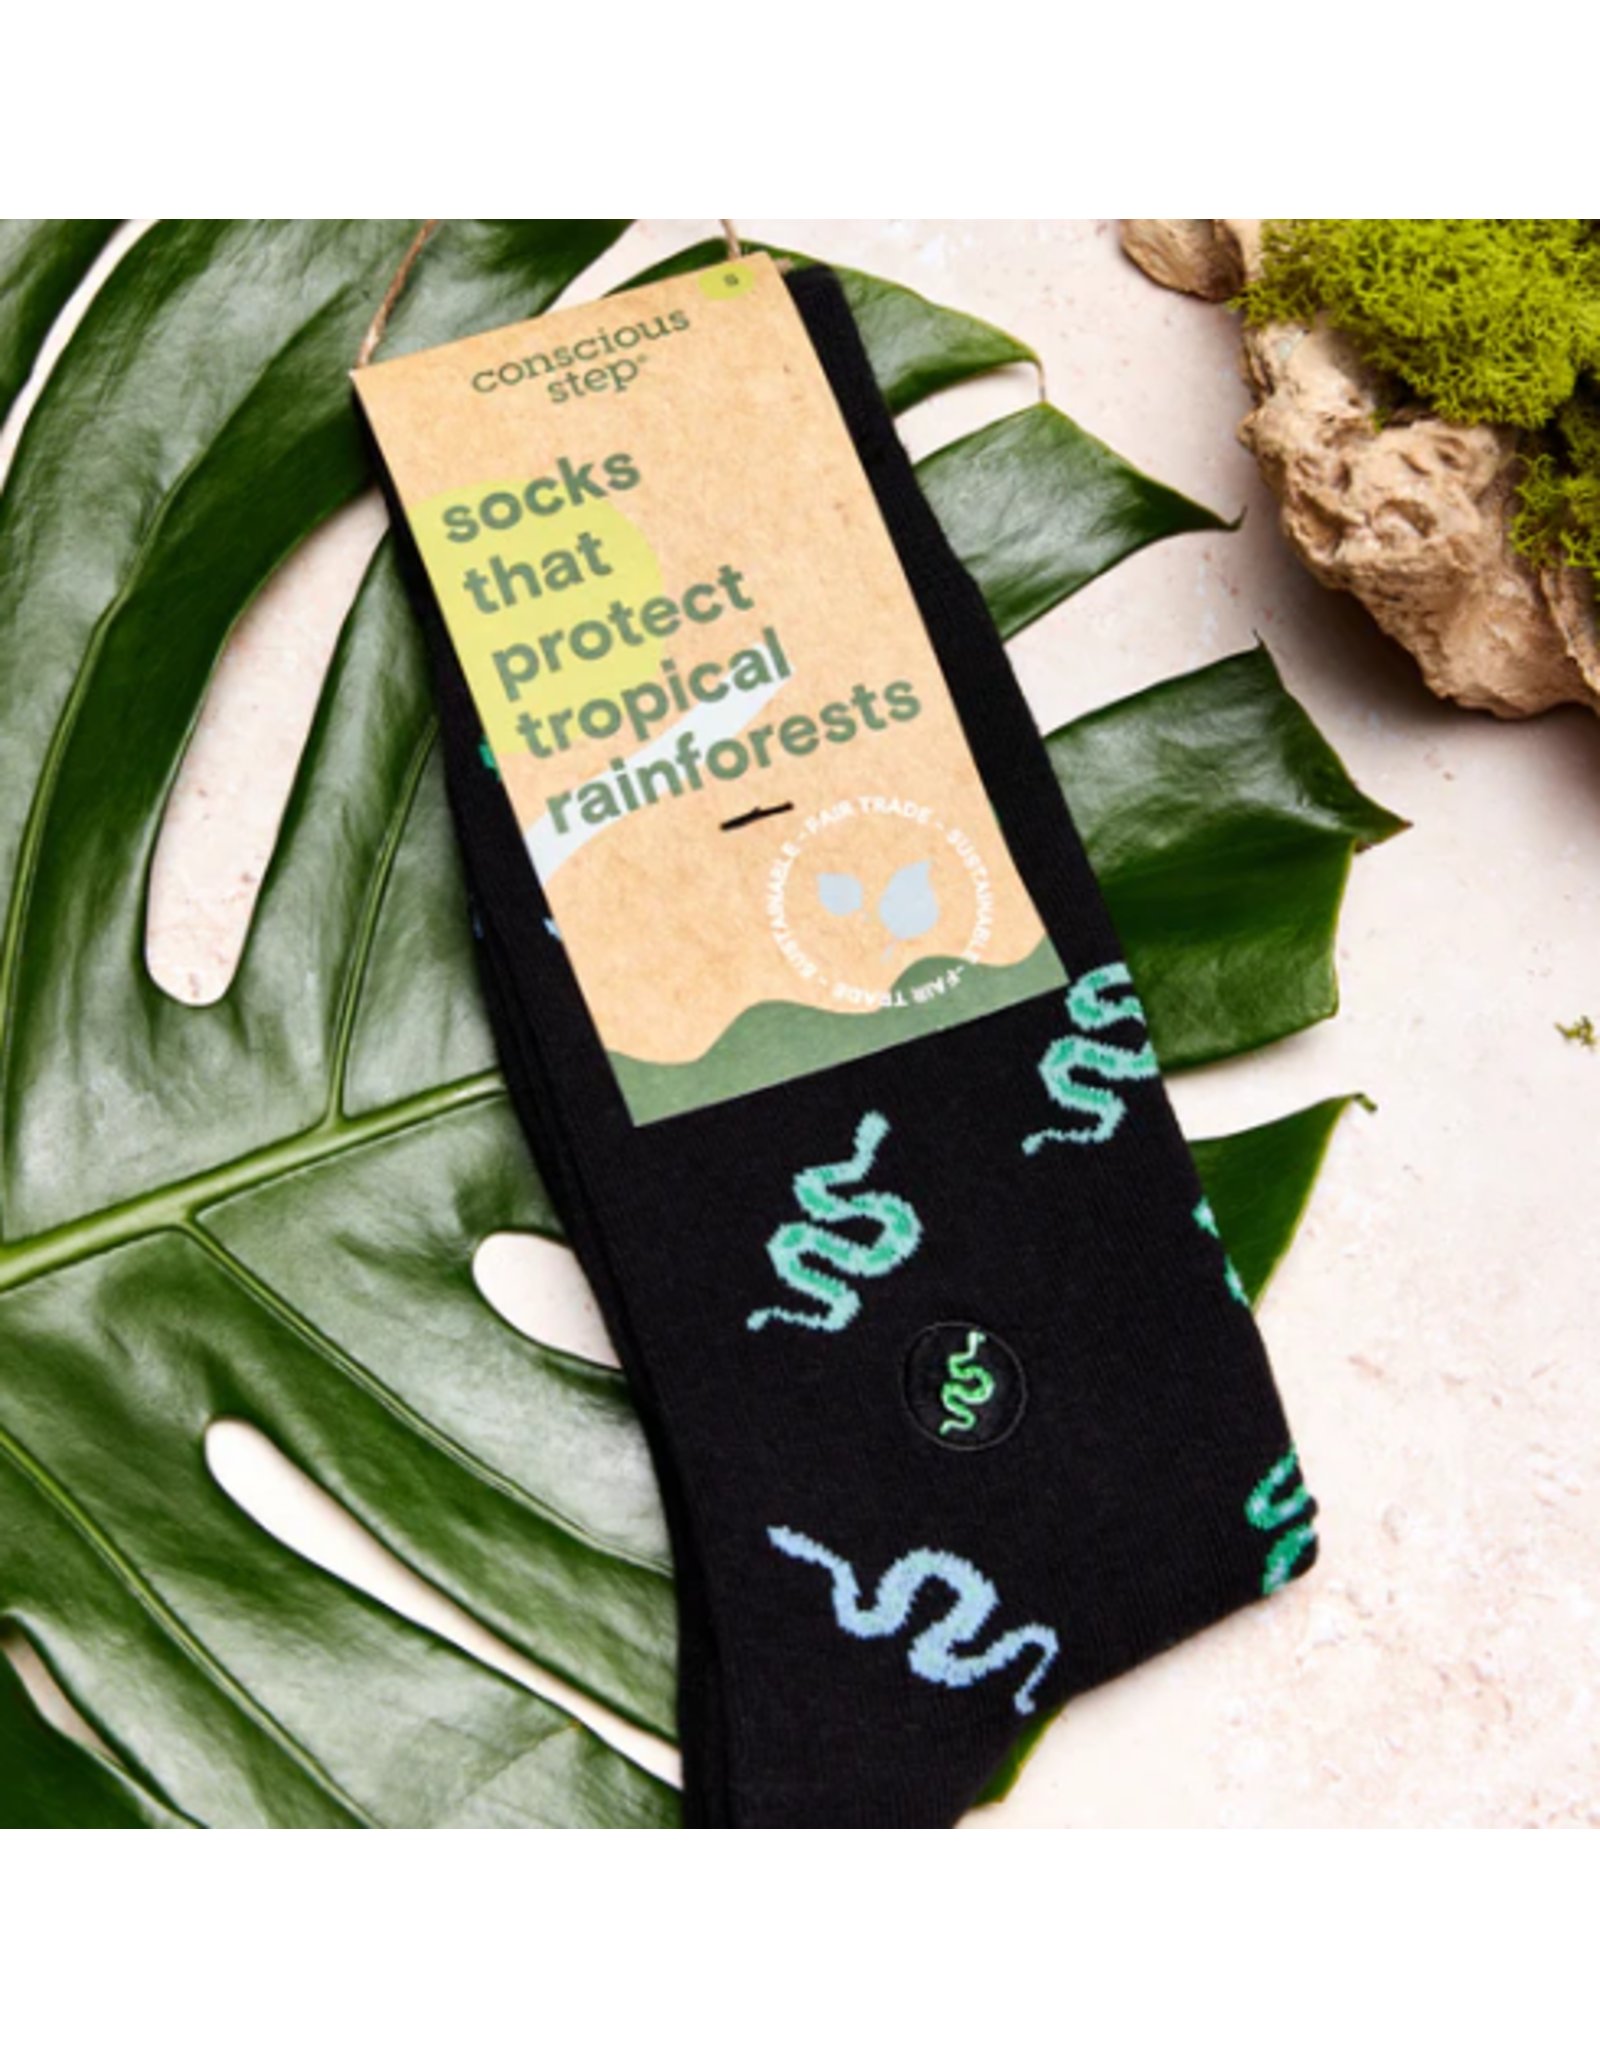 India Crew Socks That Protect Tropical Rainforests - Snakes